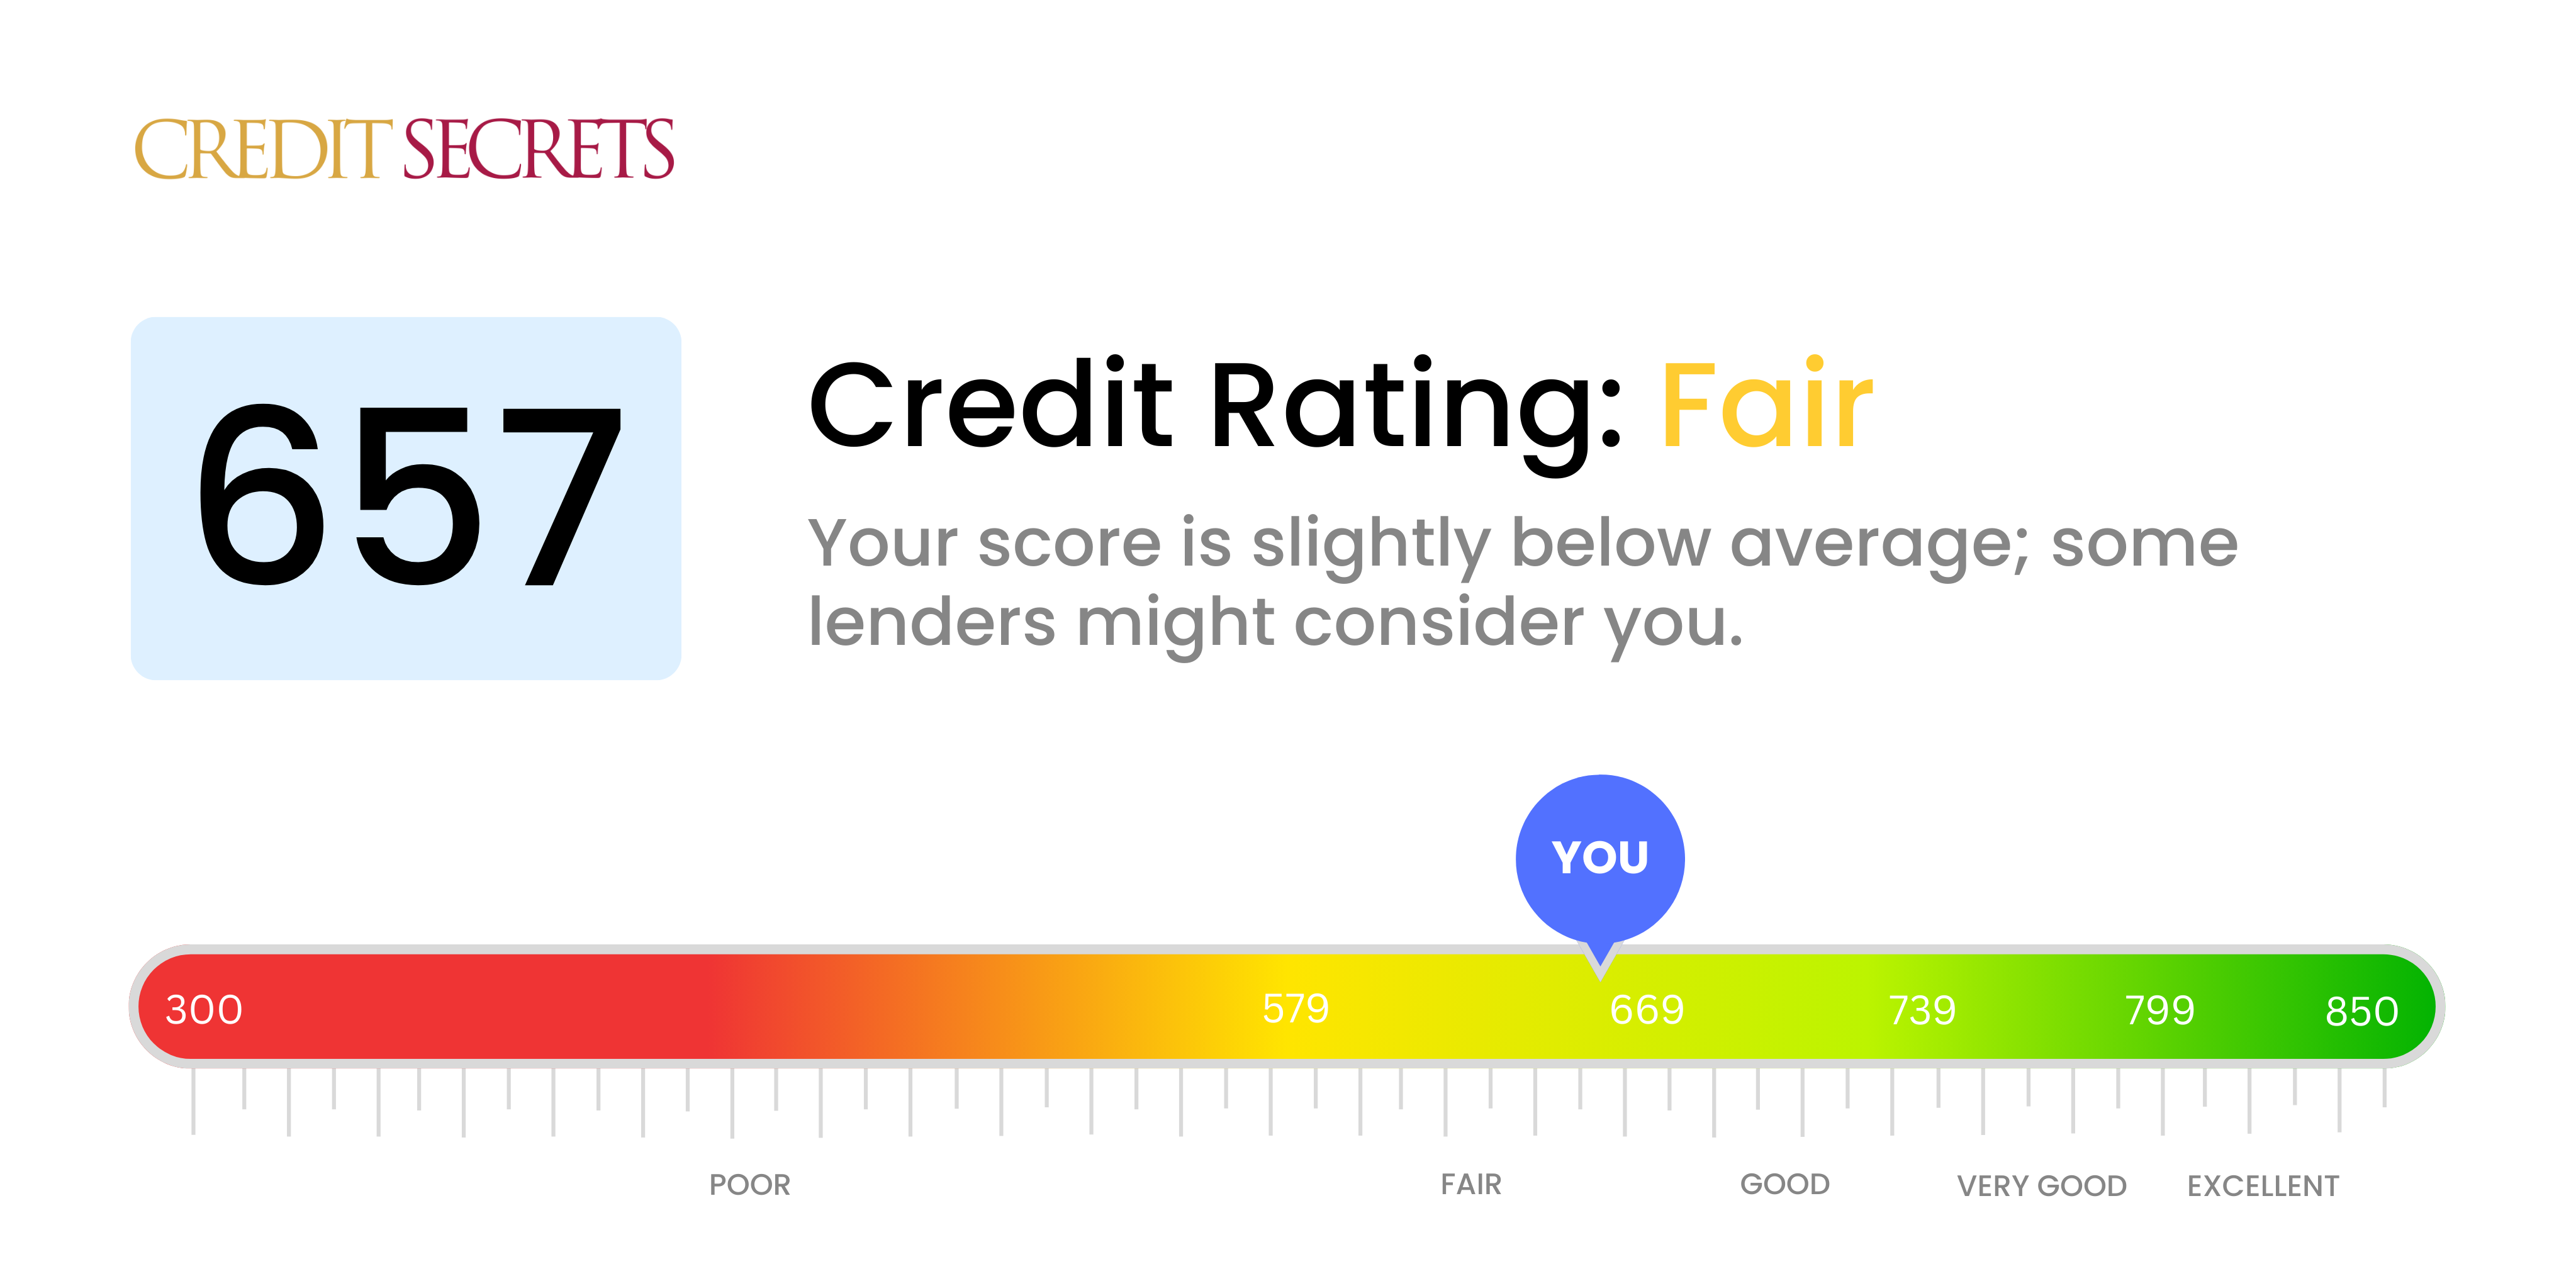 Is 657 a good credit score?